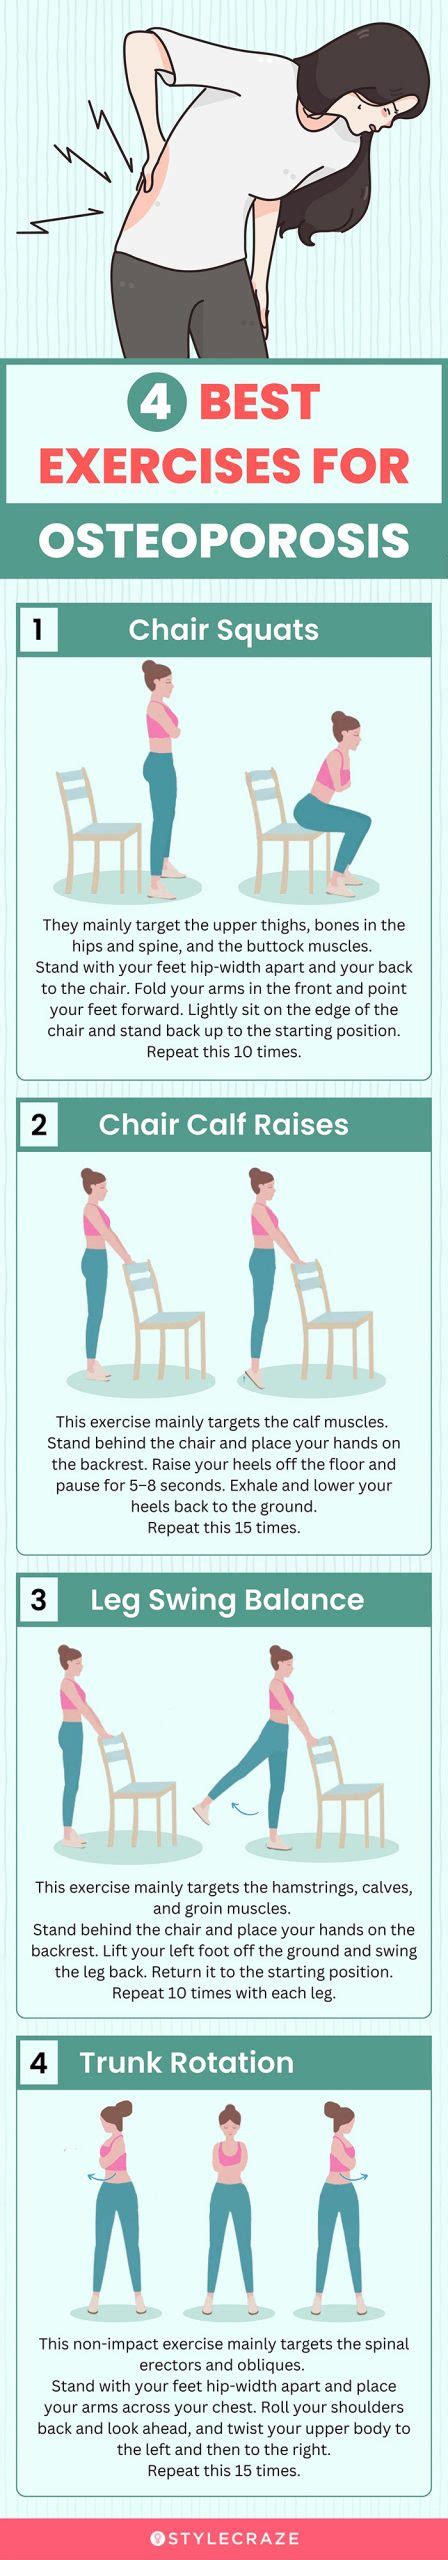 12 Safe Exercises For Osteoporosis With Steps And Pictures